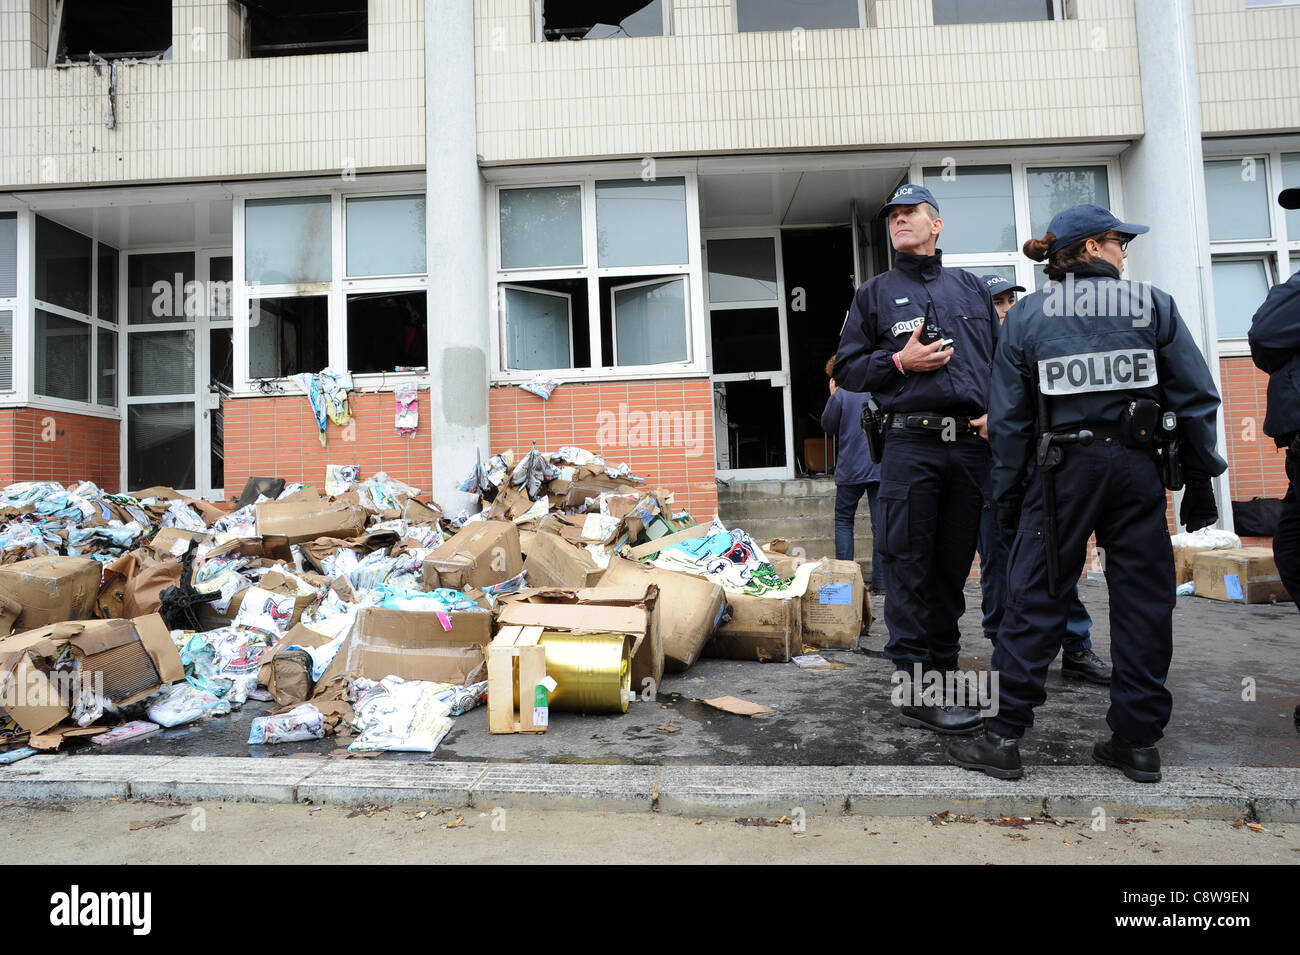 Office of French satirical magazine 'Charlie Hebdo' after a petrol bomb attack over a prophet Muhammad caricature cover story. Stock Photo